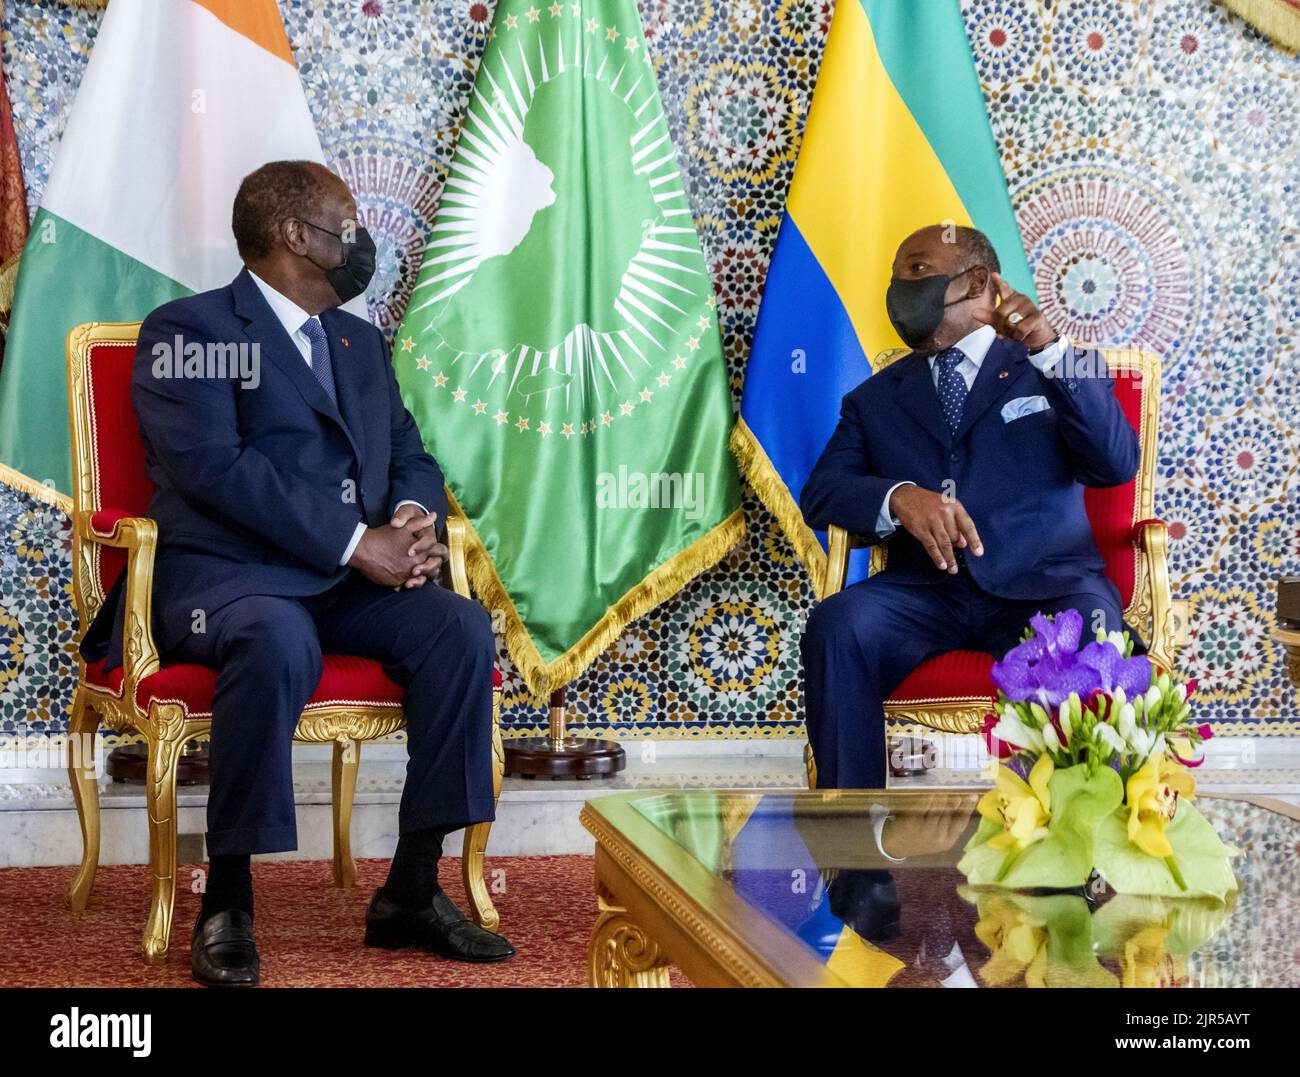 Ivorian President Alassane Ouattara (L) is received by his Gabonese counterpart Ali Bongo Ondimba (R) at the Gabonese presidency during a friendship and working visit by the Ivory Coast president to Libreville on January 17, 2022. Stock Photo